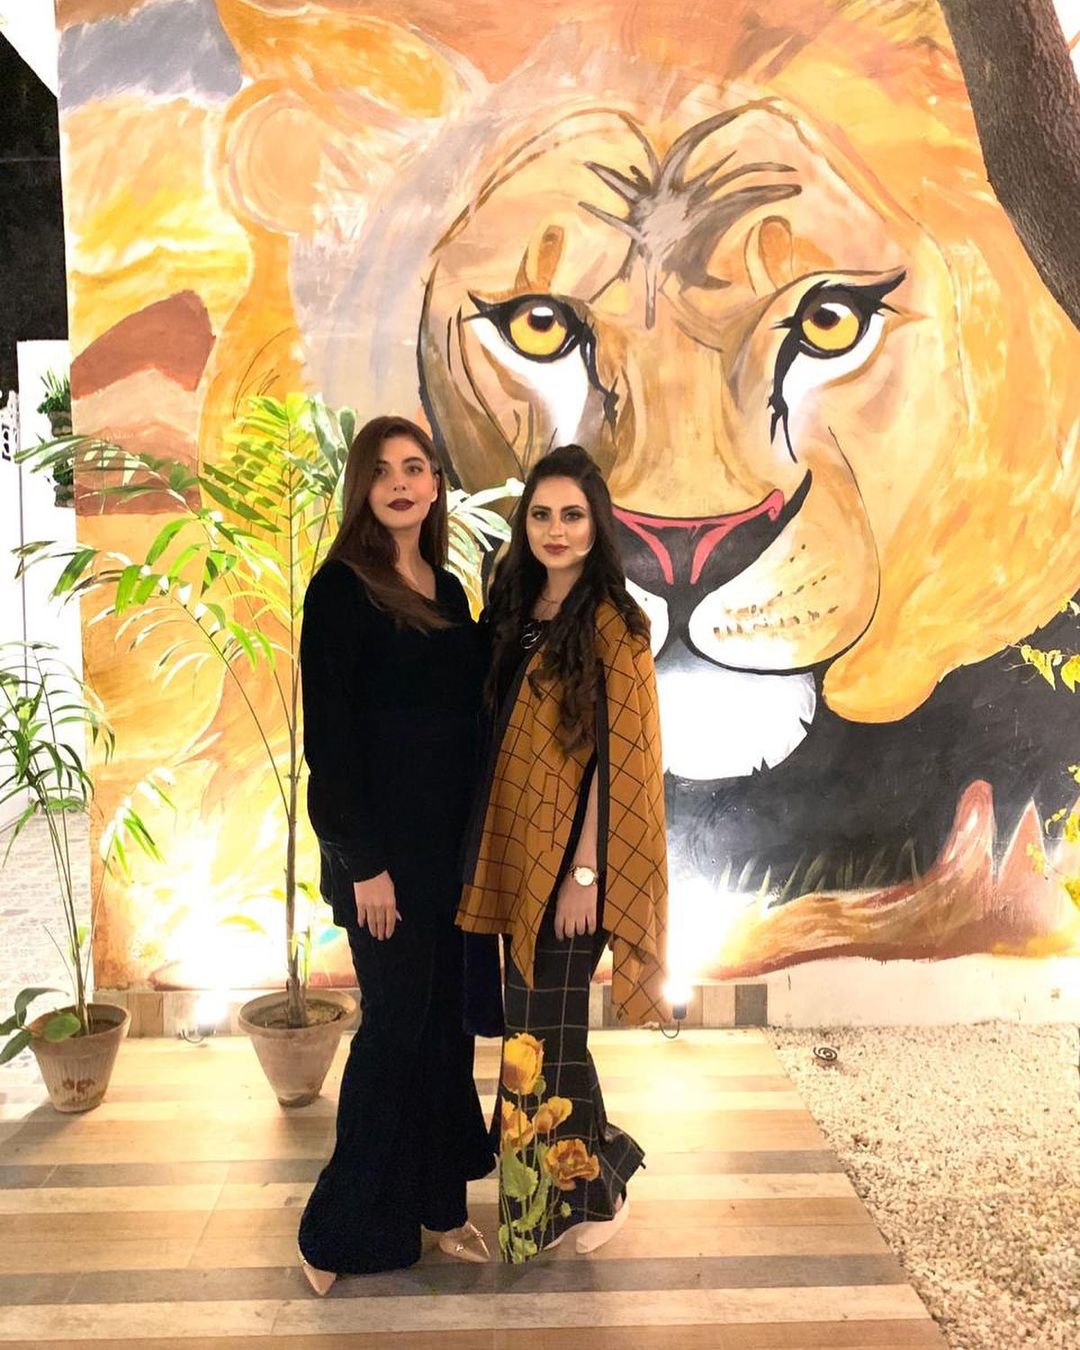 Gorgeous Actress Armeena Khan Spotted at The Forest Restaurant